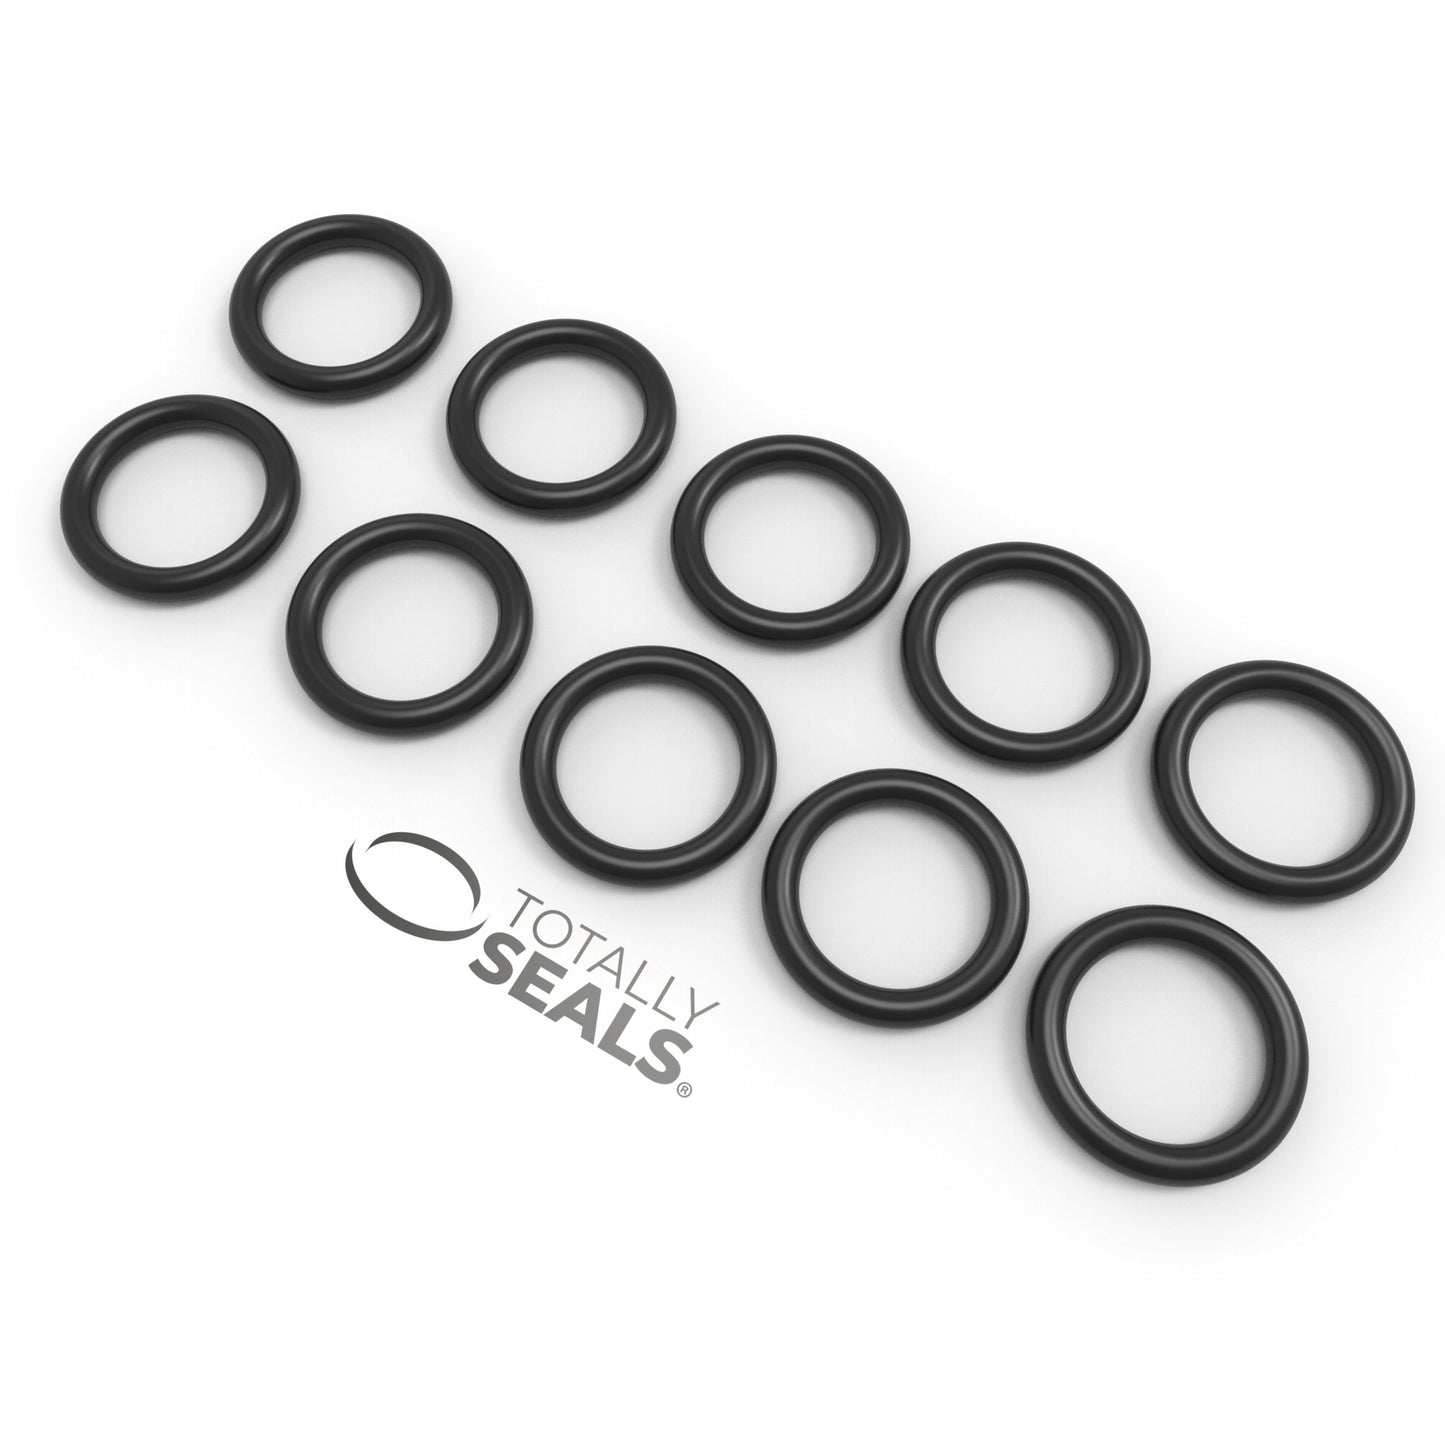 1" x 3/32" (BS120) Imperial Nitrile Rubber O-Rings - Totally Seals®